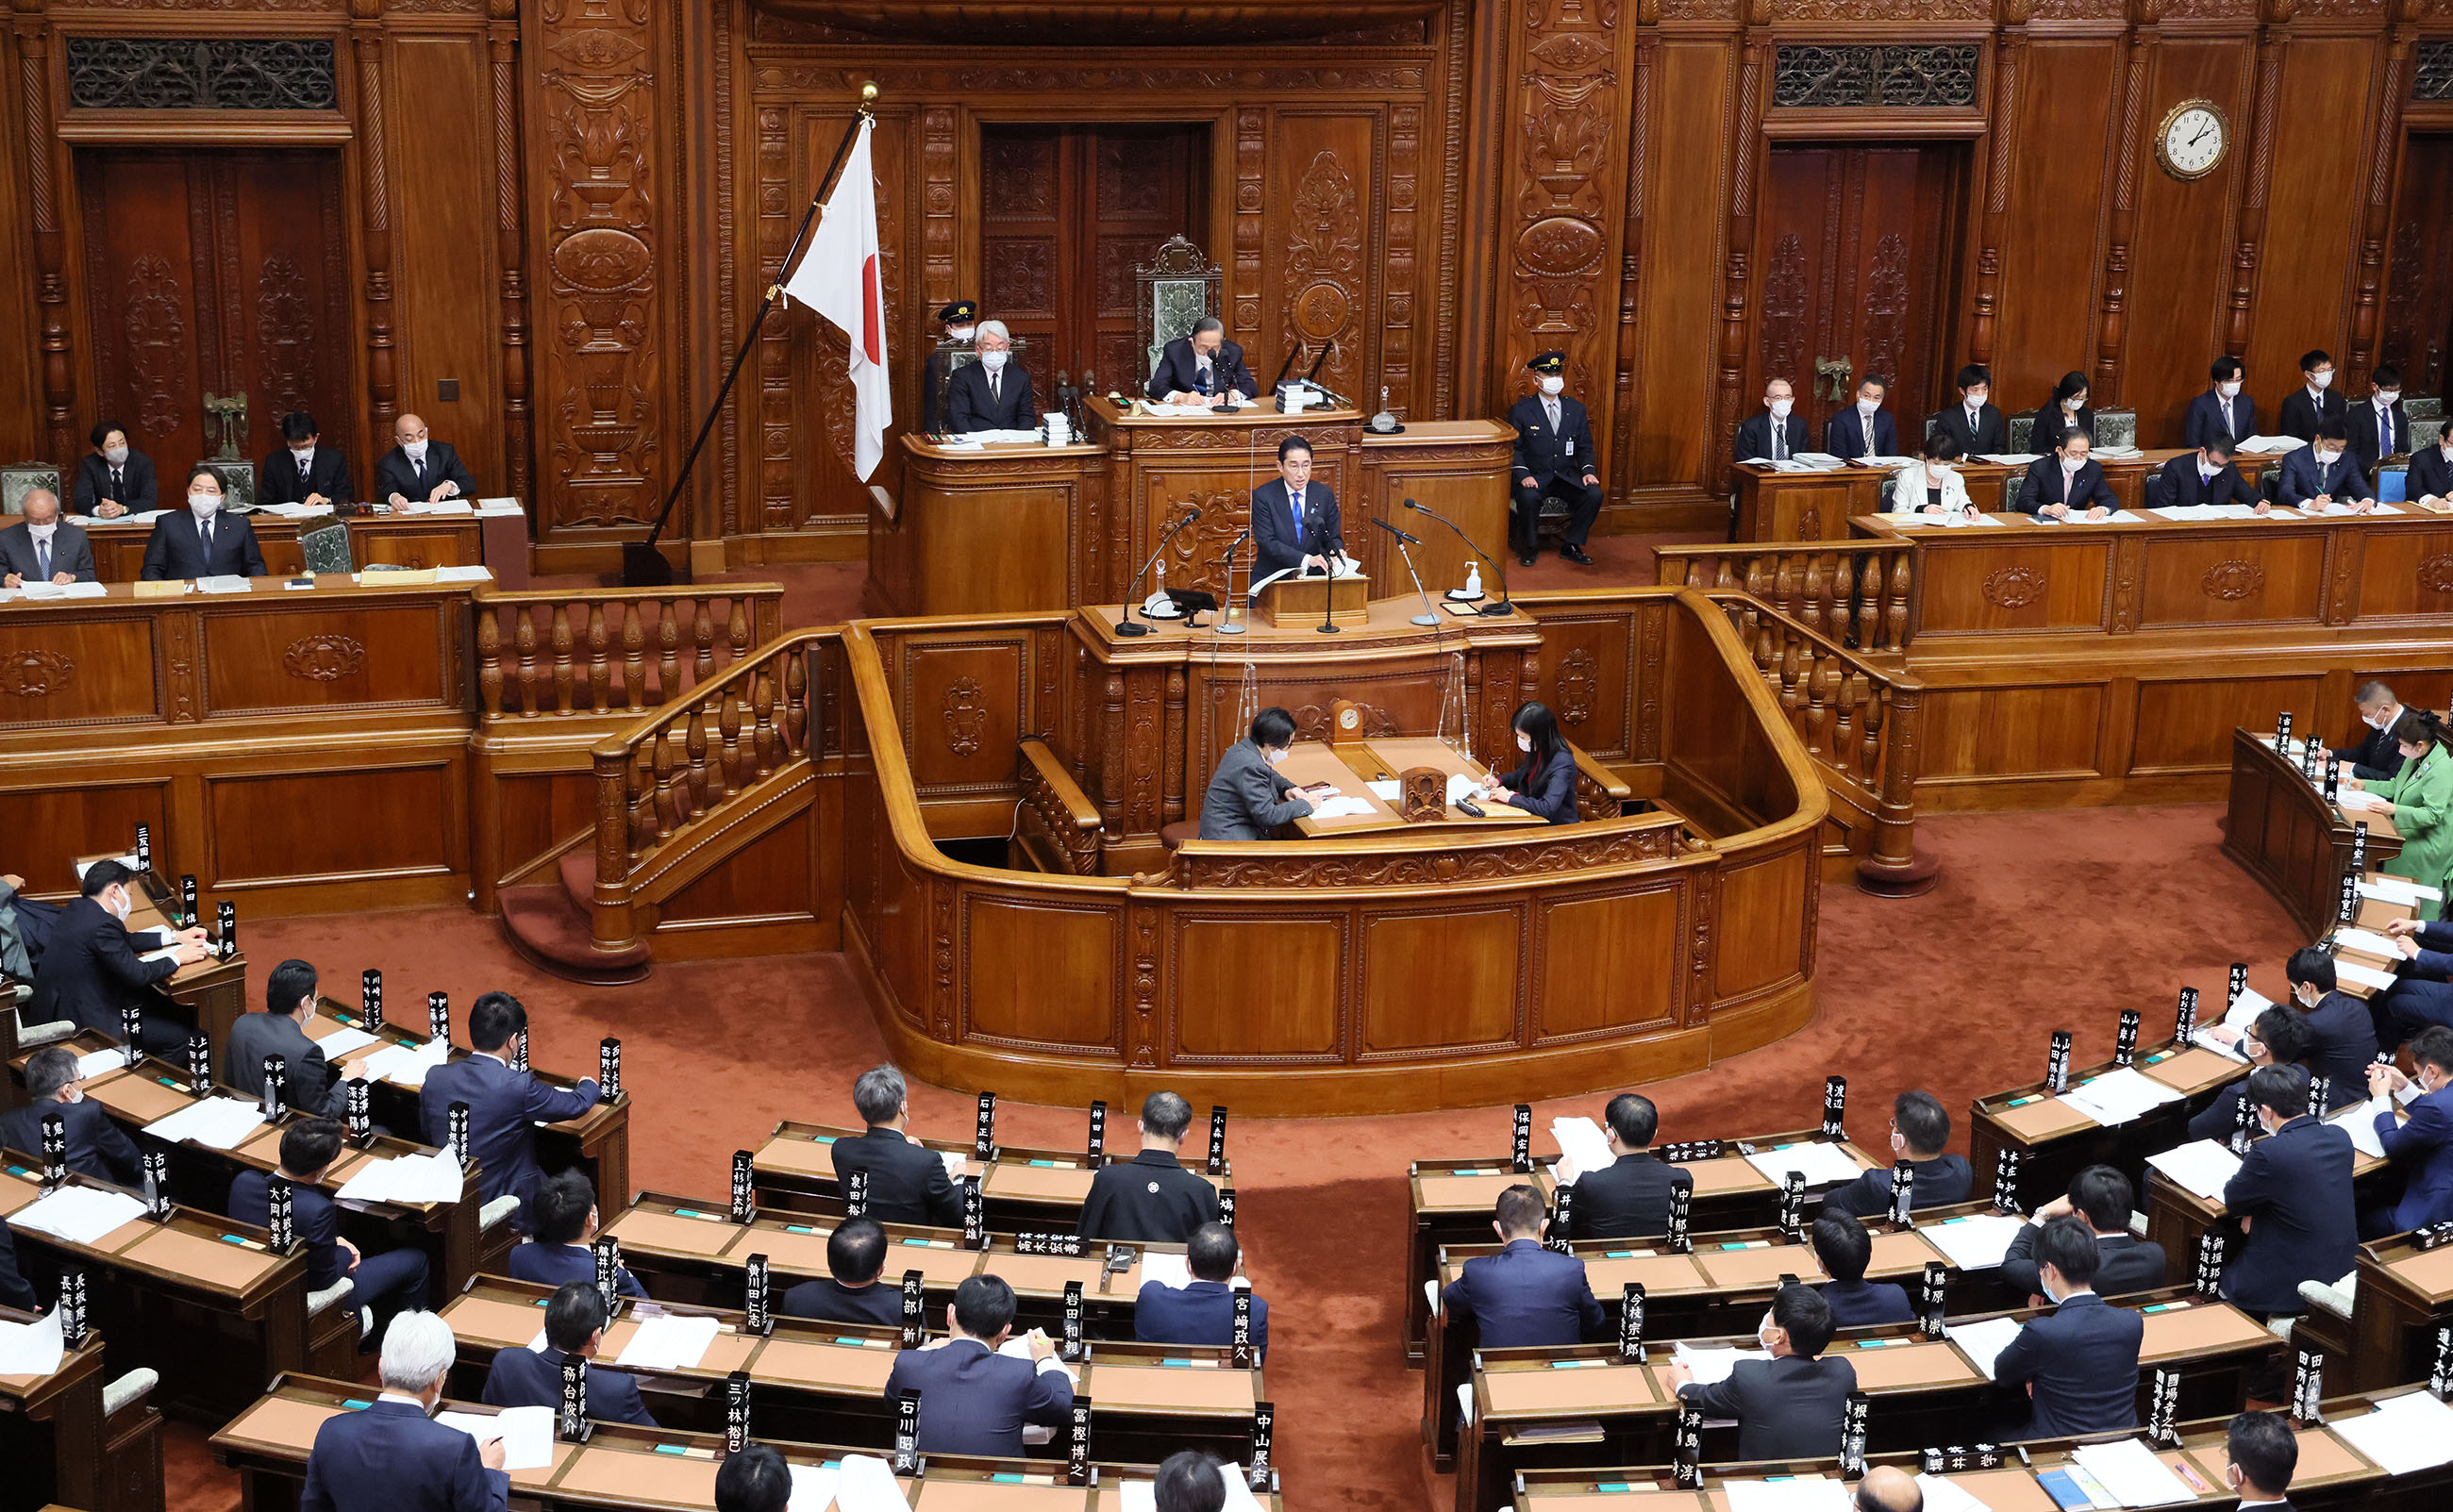 Prime Minister Kishida delivering a policy speech during the plenary session of the House of Representatives (9)